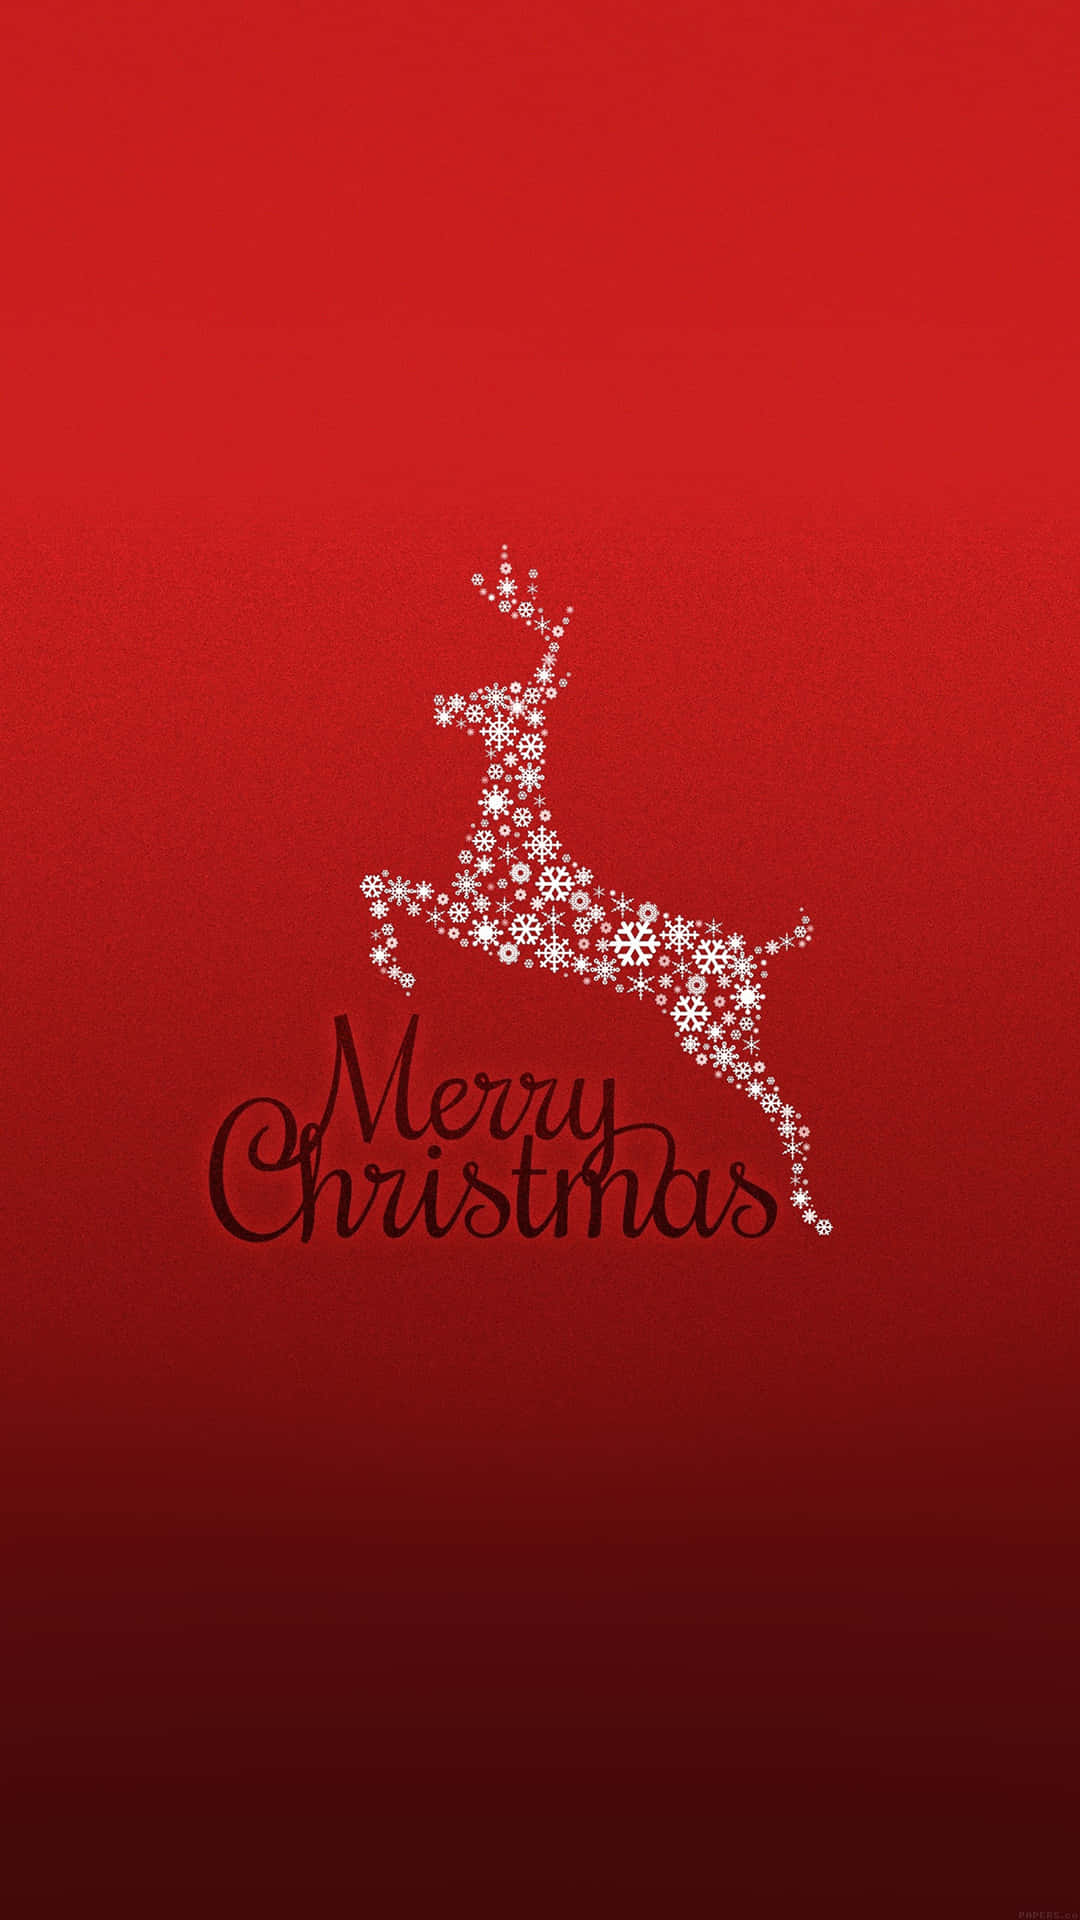 Merry Christmas Wallpapers Hd